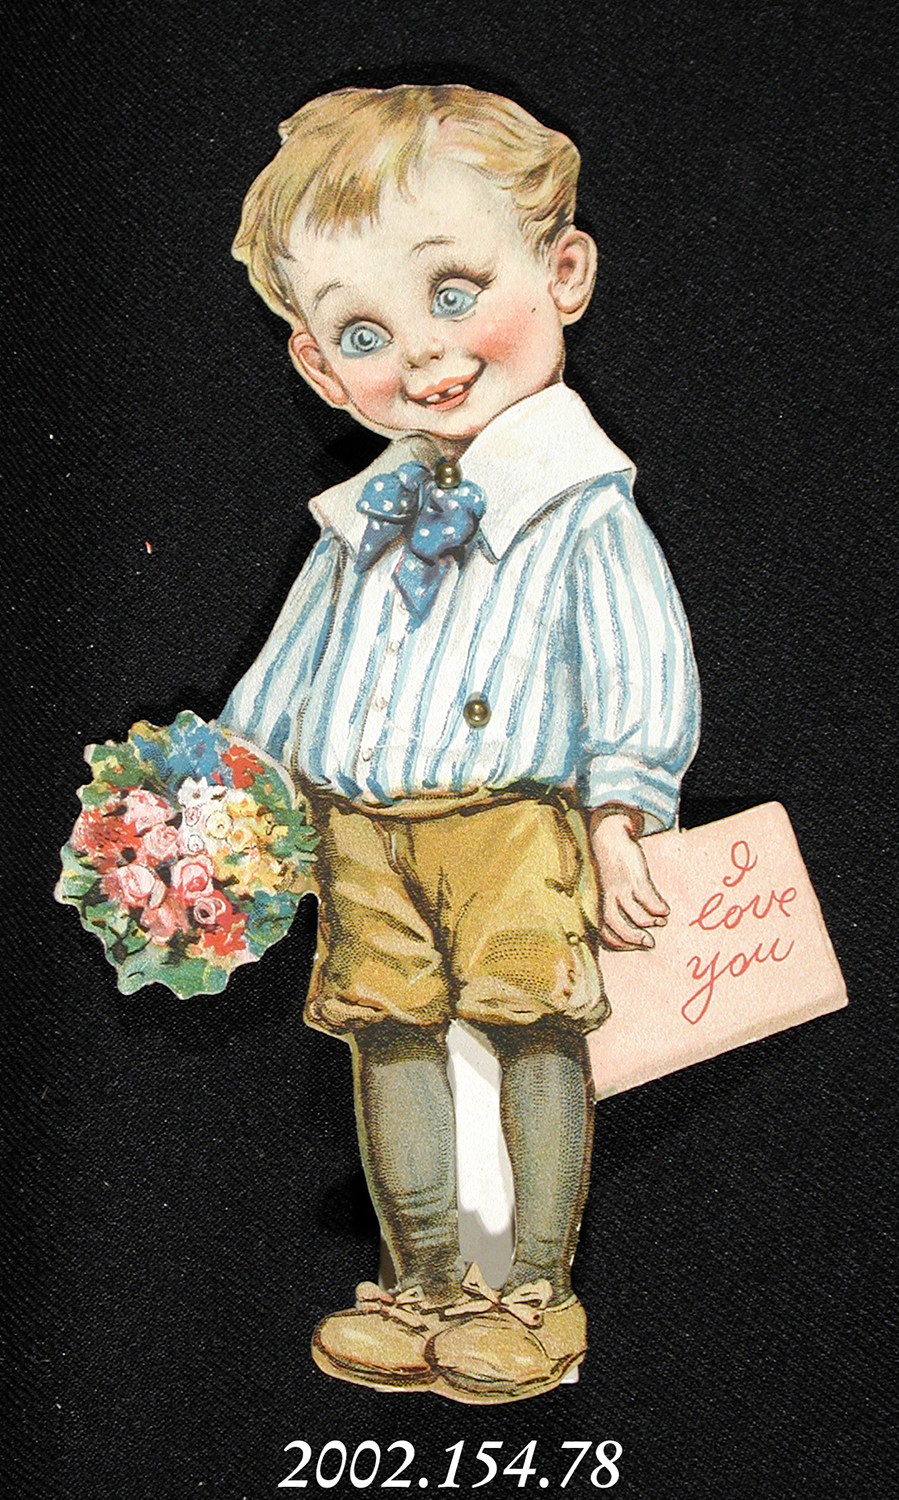 A valentine card in the shape of a boy holding flowers.